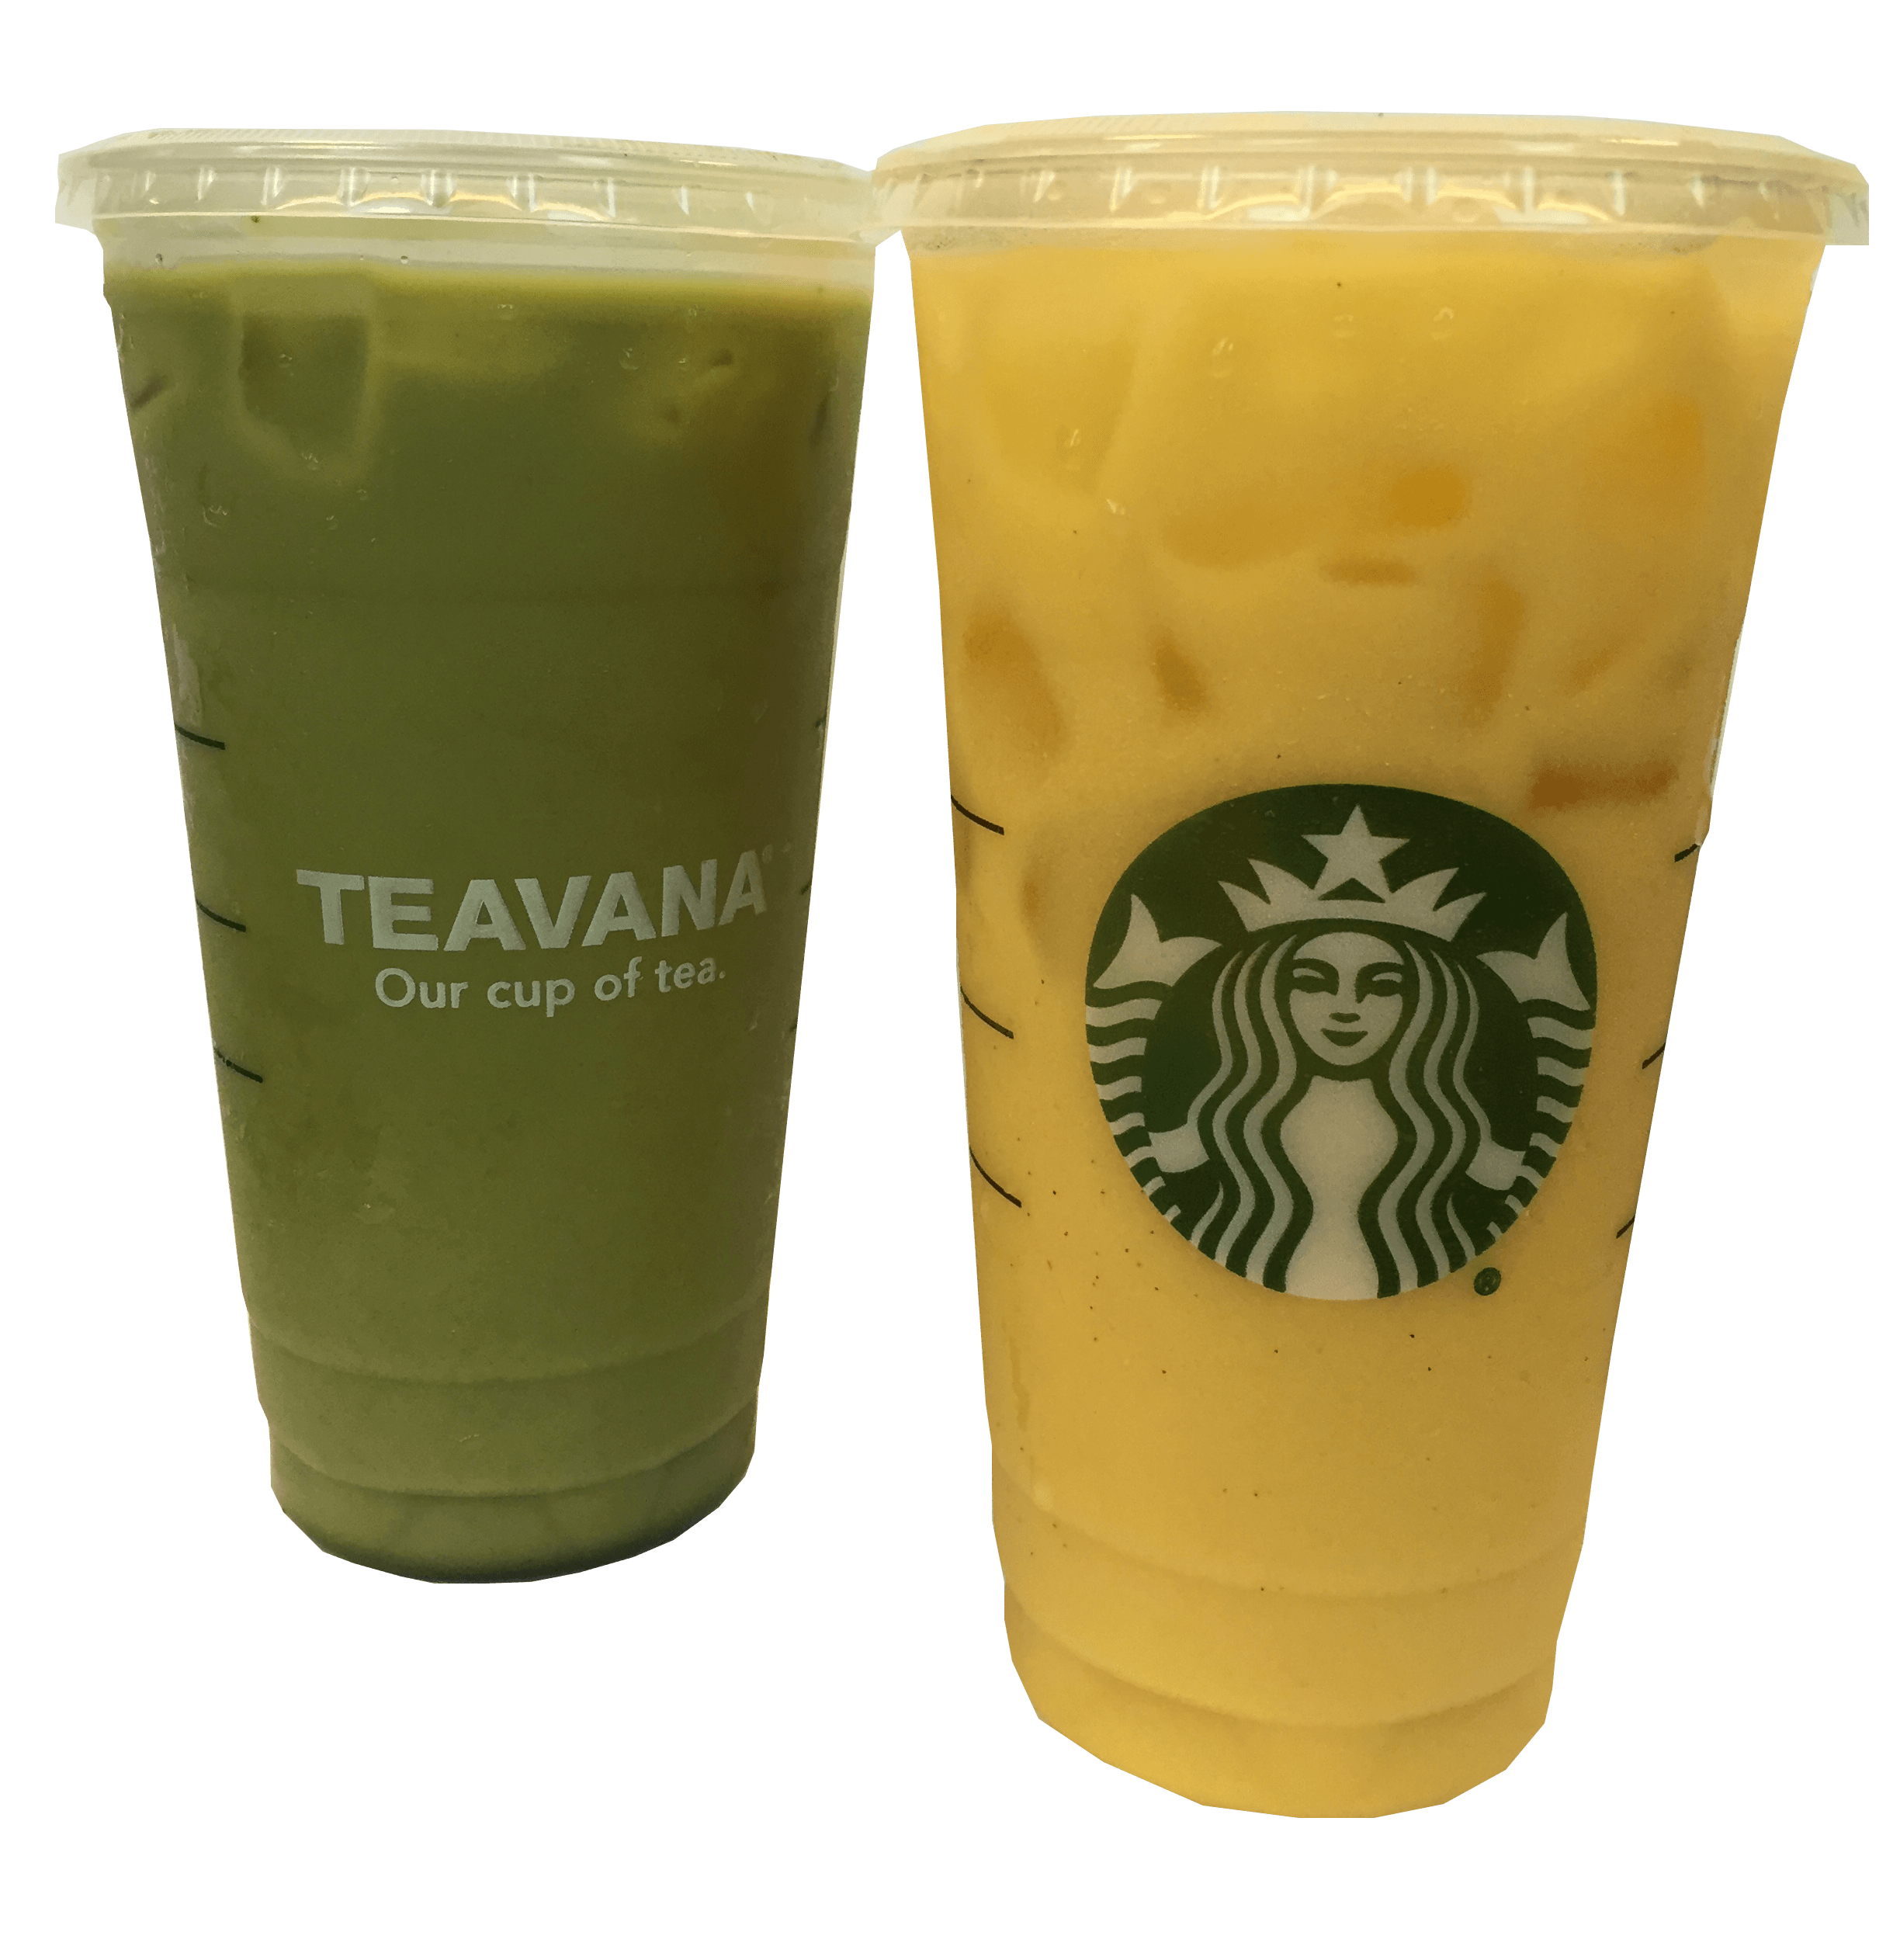 Green and Yellow Drink Logo - Starbucks Has Two More 'Secret Drinks' to Try